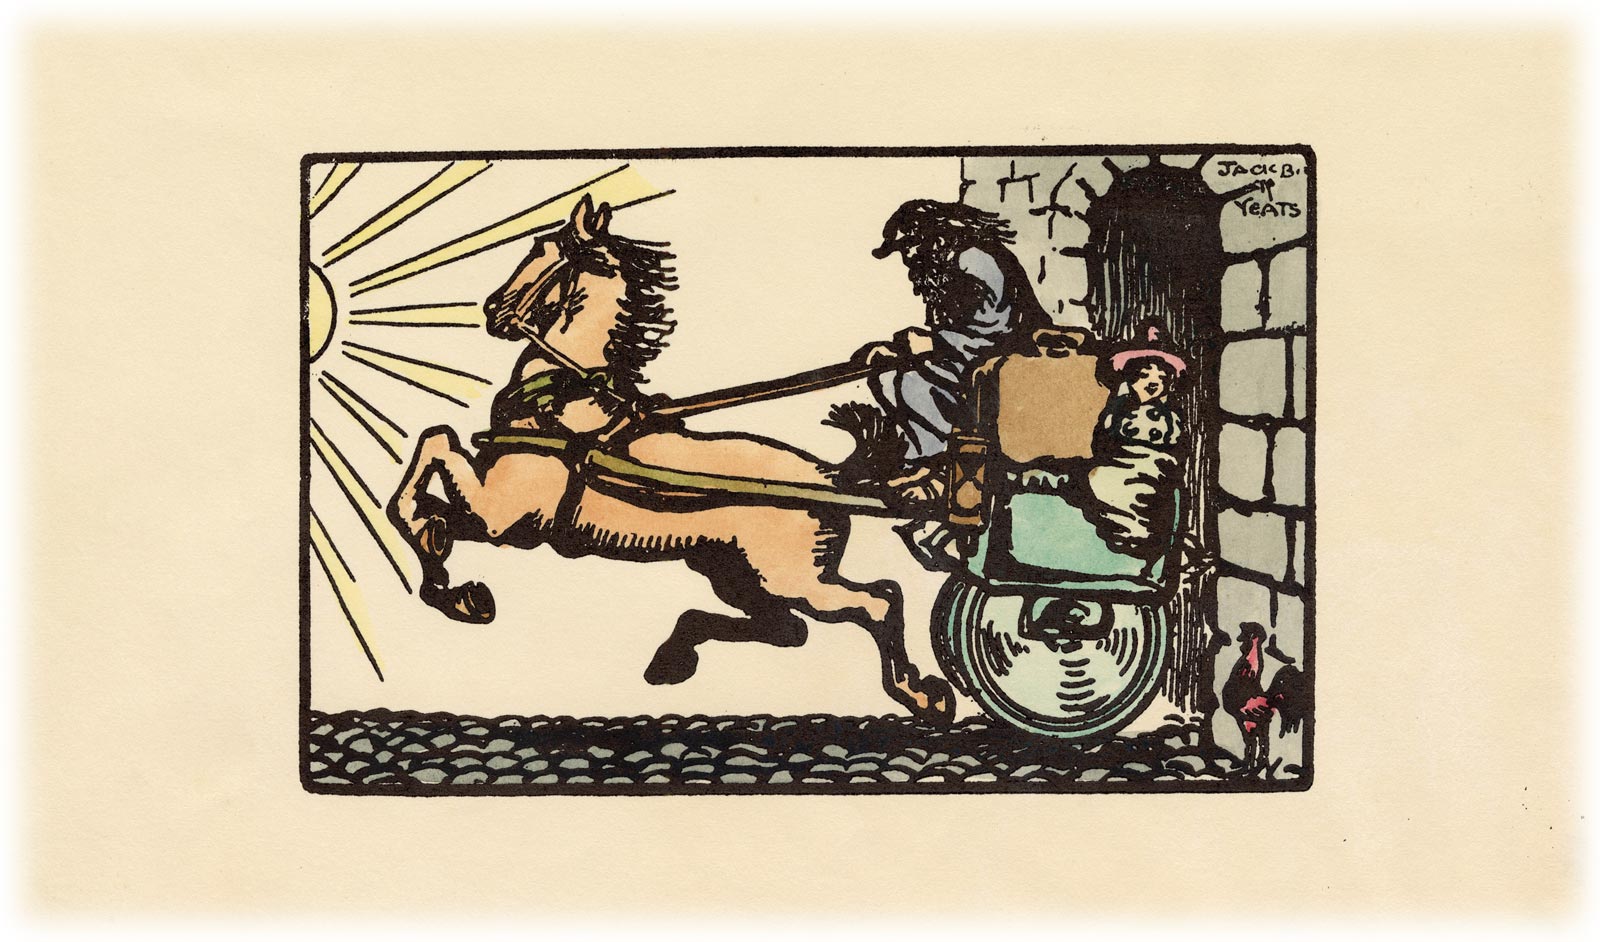 Woodblock print of a horse, running left towards the sun, hitched to a carriage carrying an older man, a young child in a red hat, and a brown suitcase. A red rooster watches from the bottom right corner.